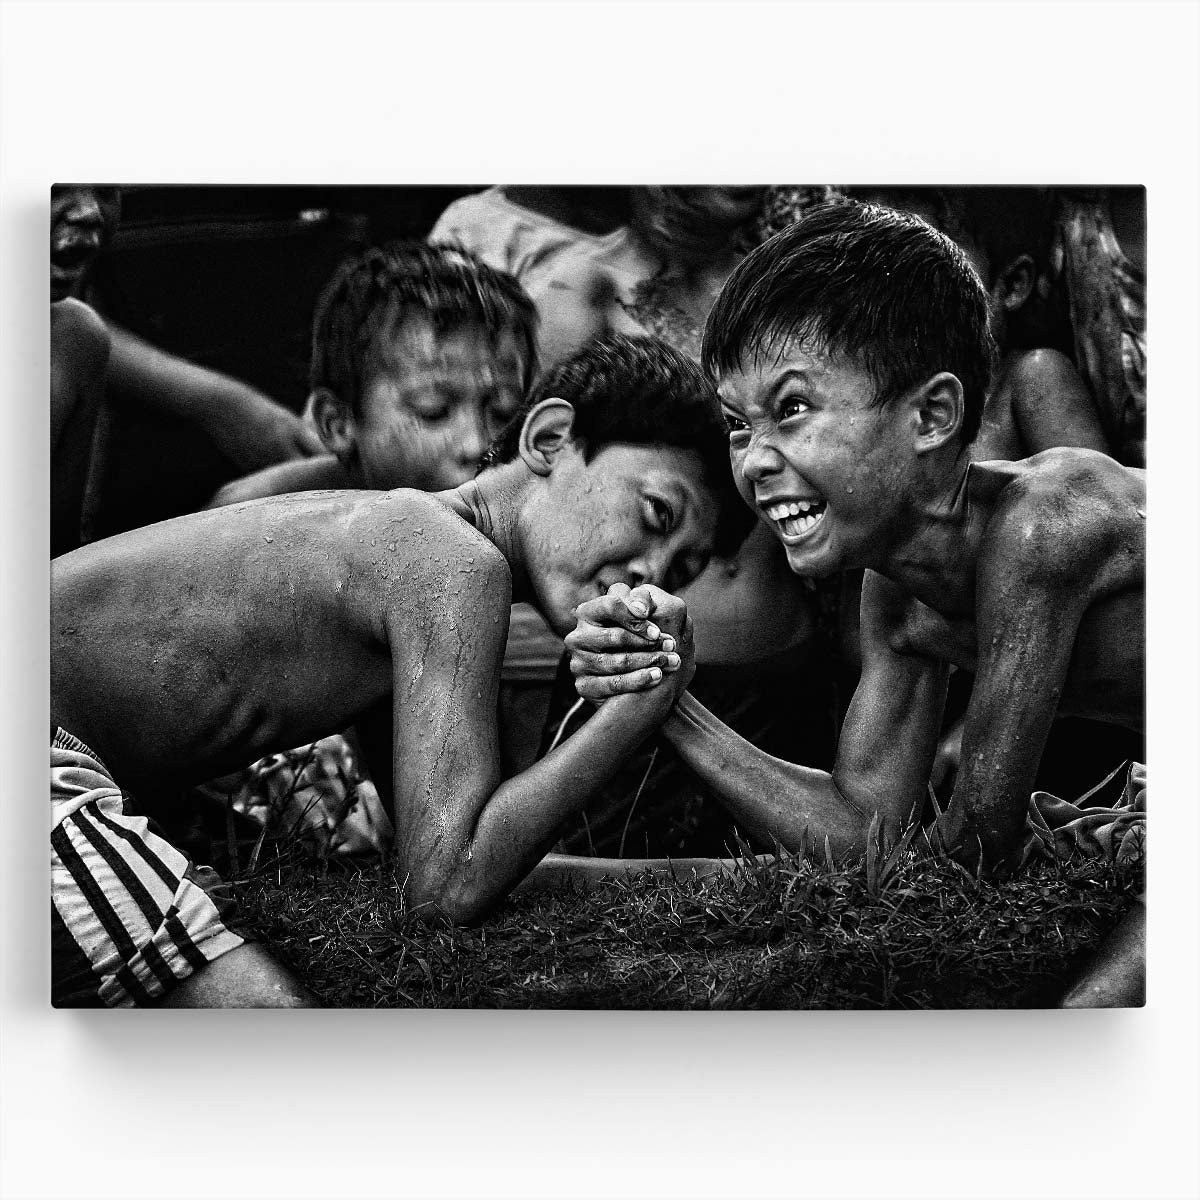 Monochrome Kids Arm Wrestling Strength Contest Wall Art by Luxuriance Designs. Made in USA.